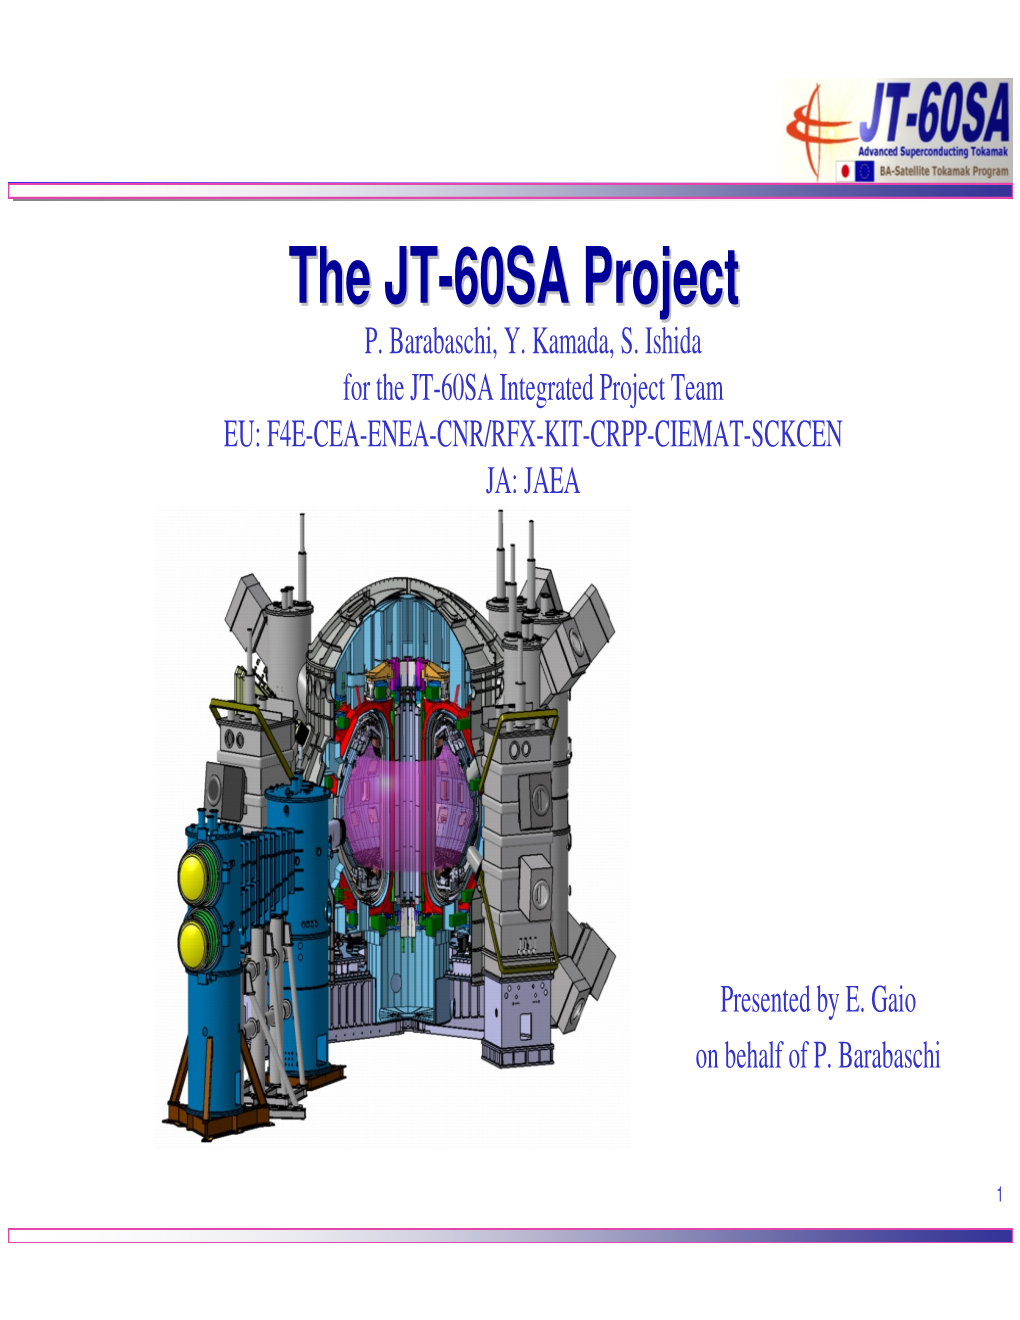 The JT-60SA Project Was Launched with the New Design with the Following Parameters